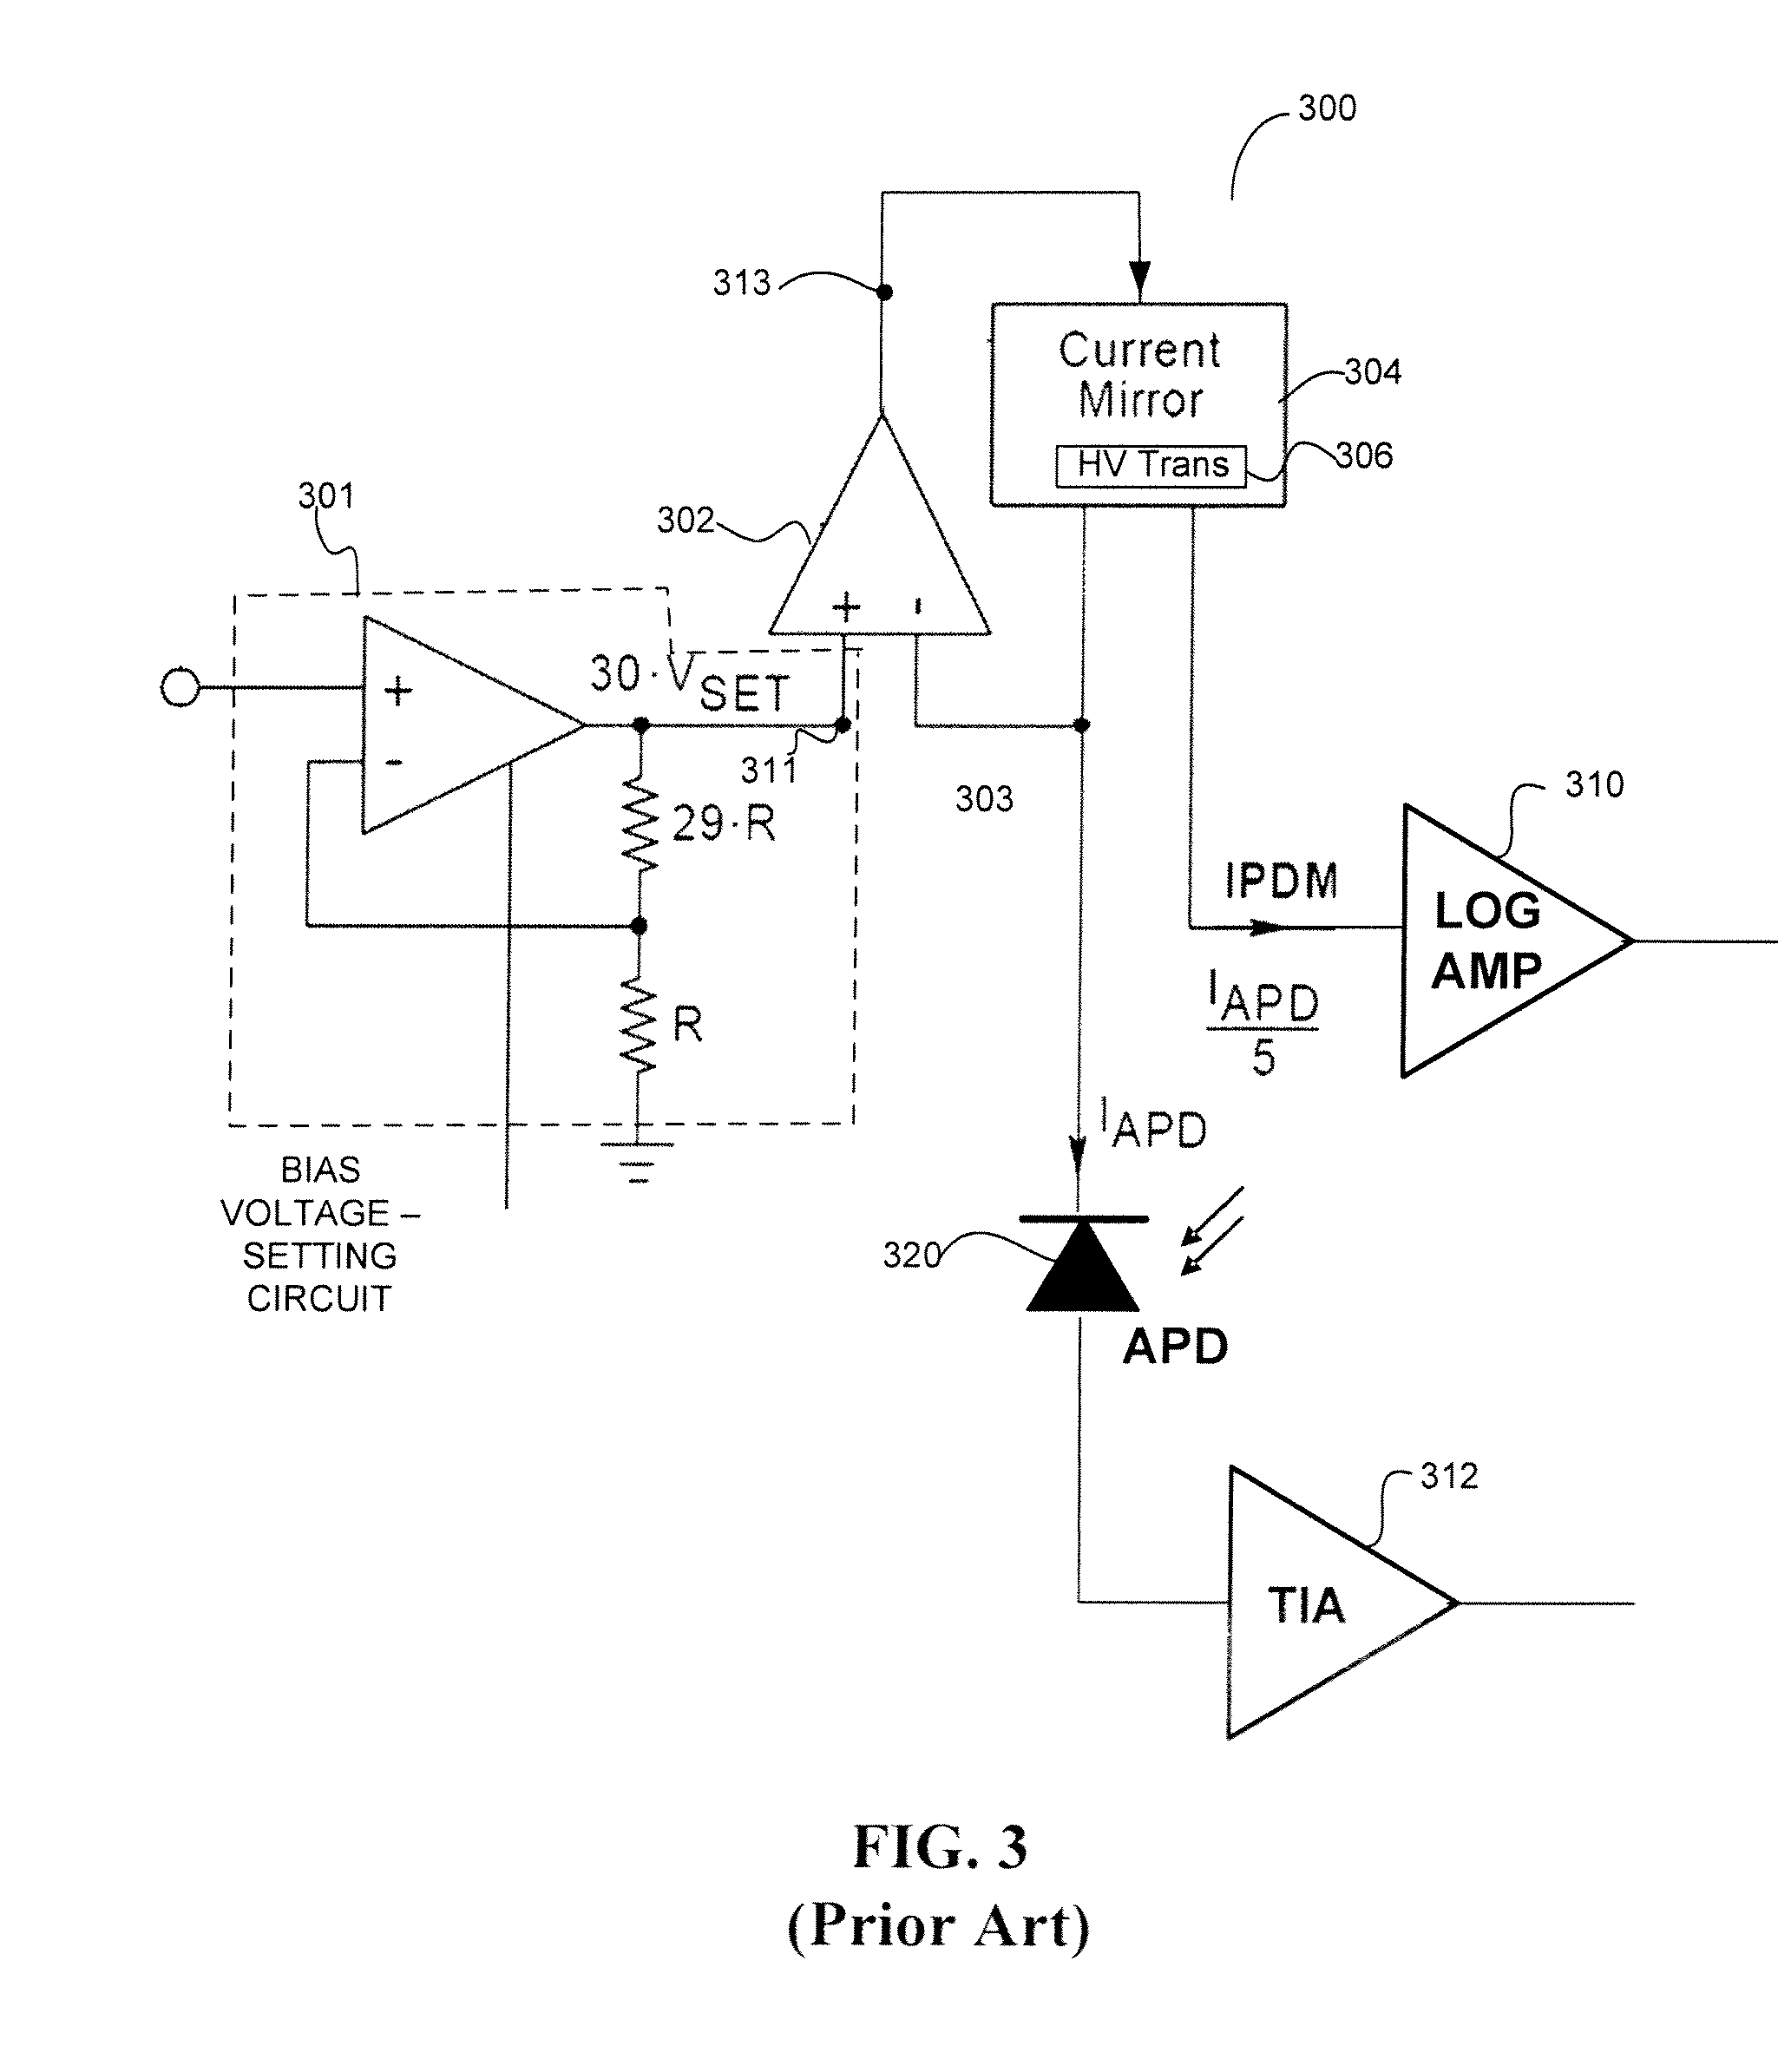 In-situ power monitor providing an extended range for monitoring input optical power incident on avalanche photodiodes